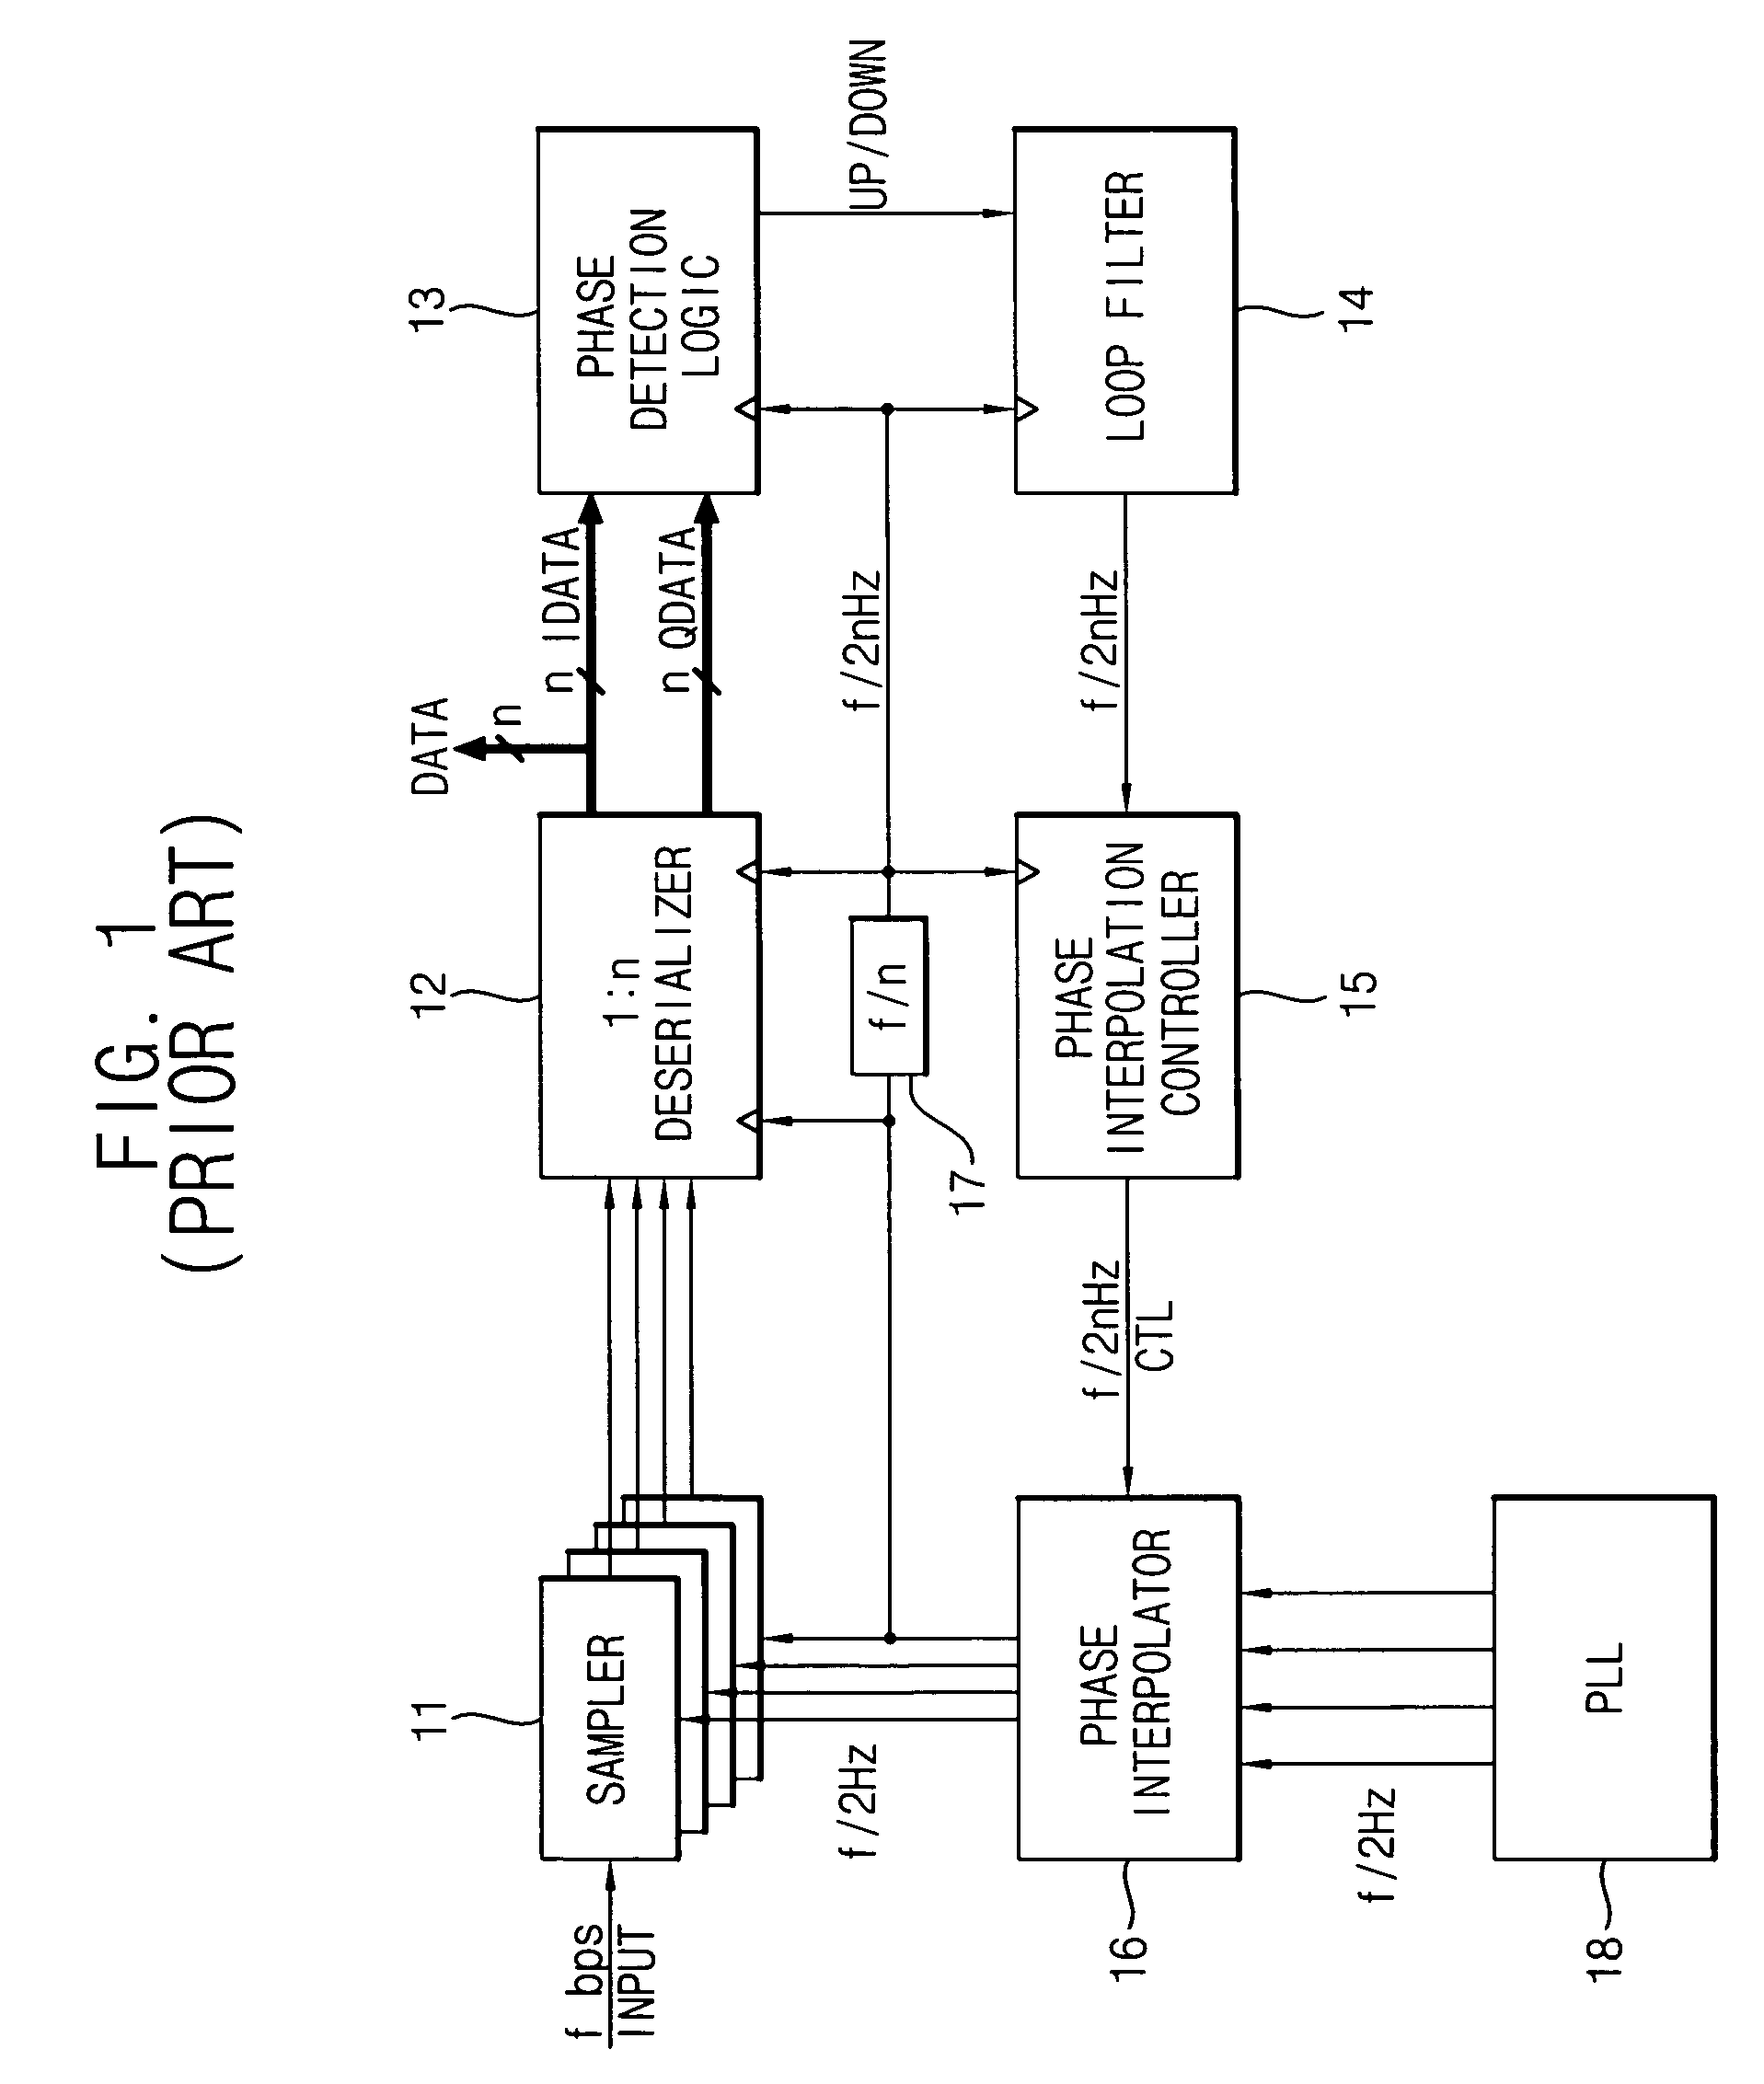 Clock and data recovery circuit having wide phase margin